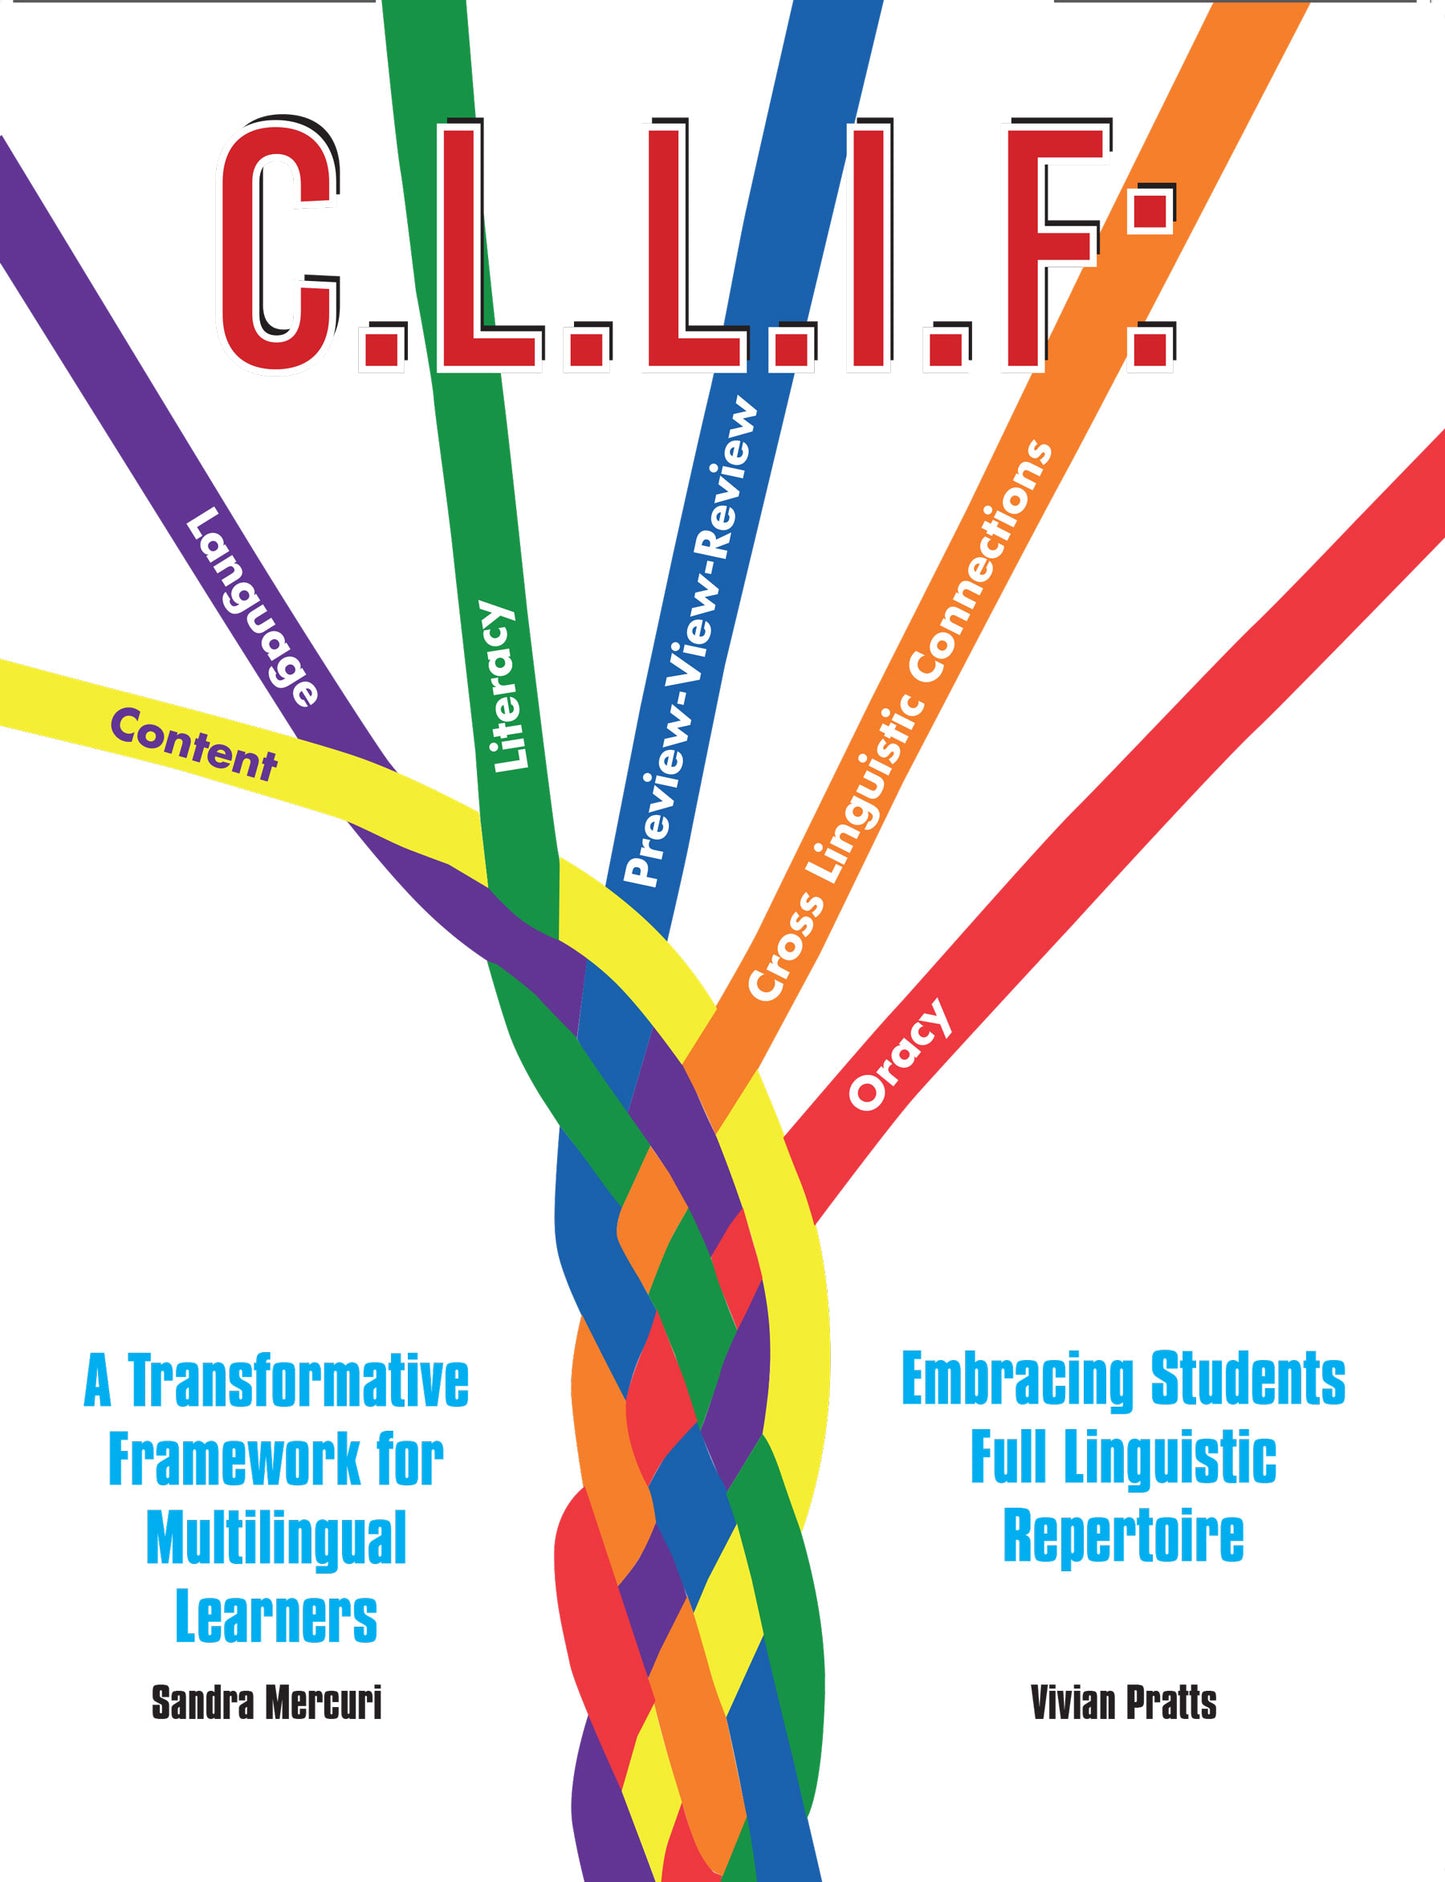 CLLIF: a Framework That Engages, Connects, and Empowers Multilingual Learners